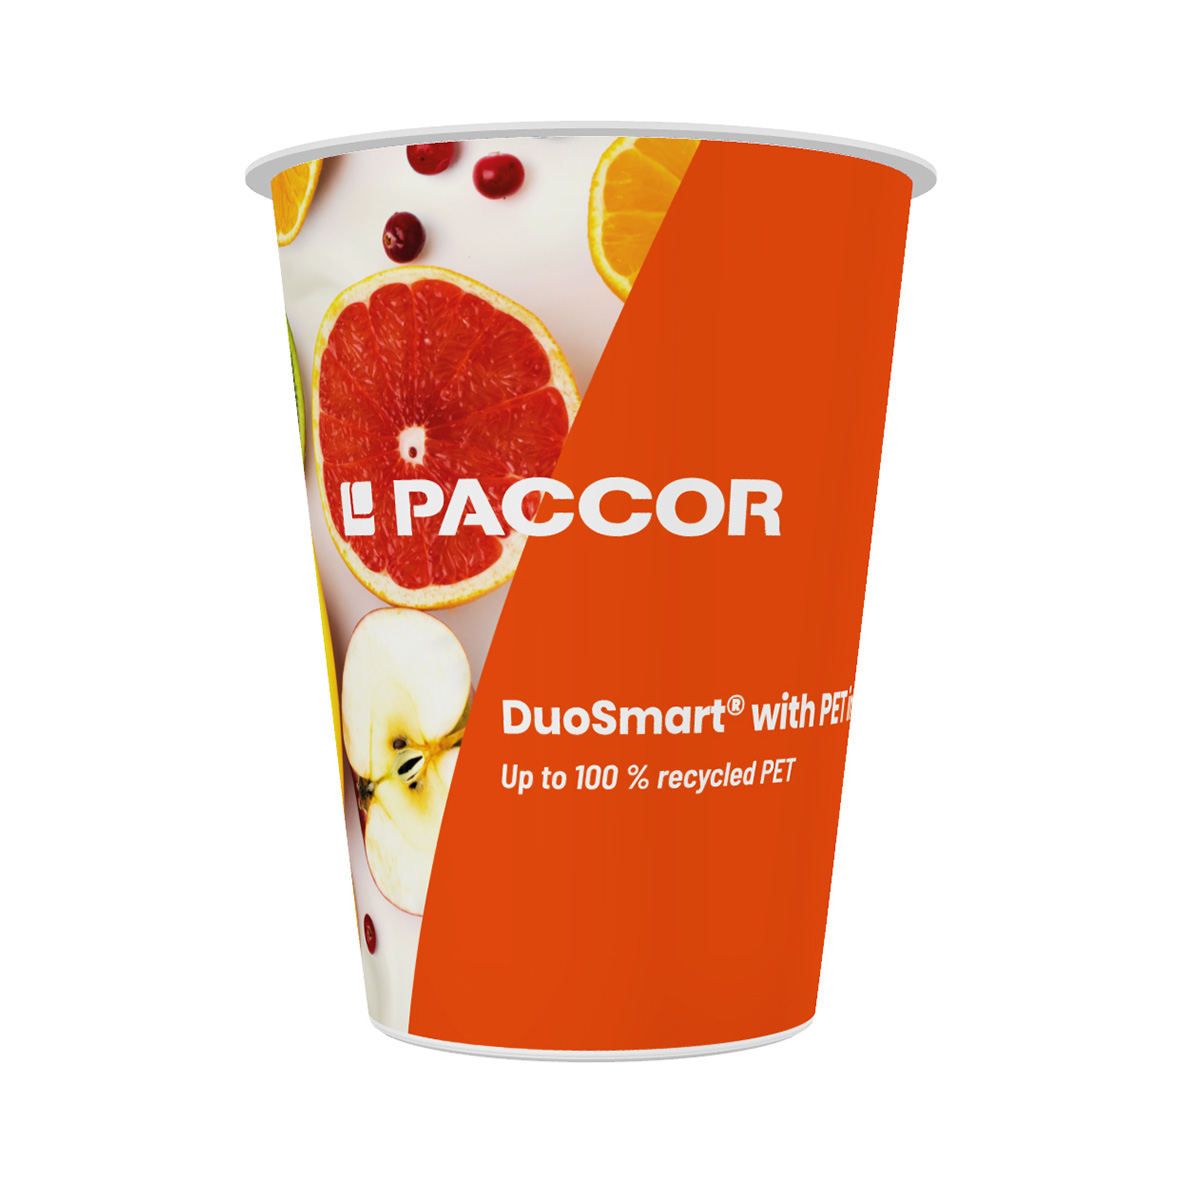  DuoSmart® with rpet inlet